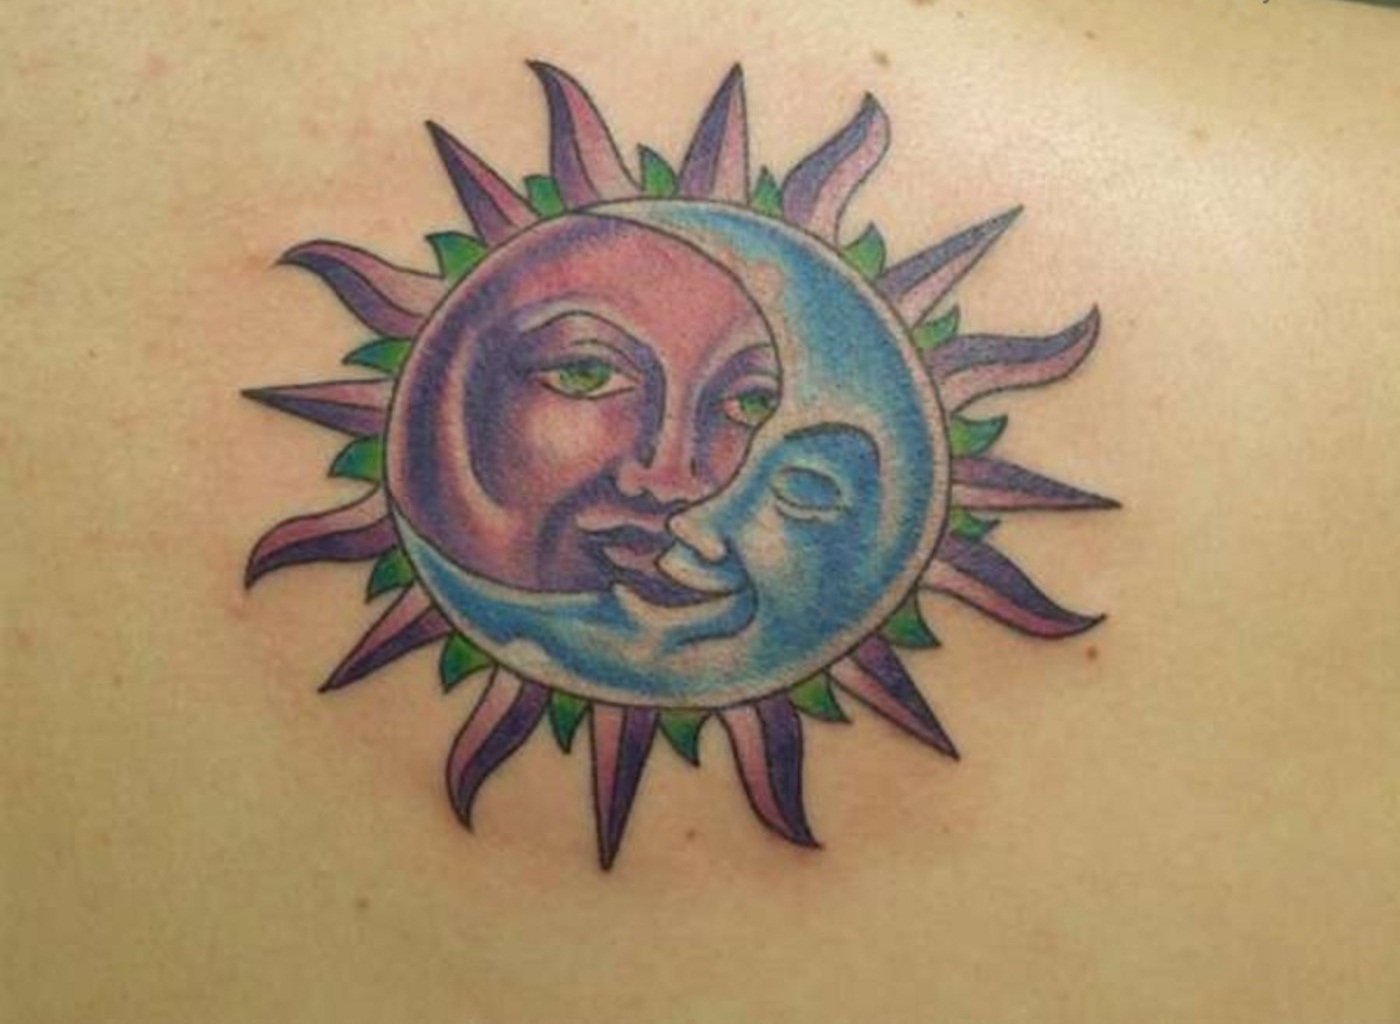 Moon Tattoos Designs, Ideas and Meaning